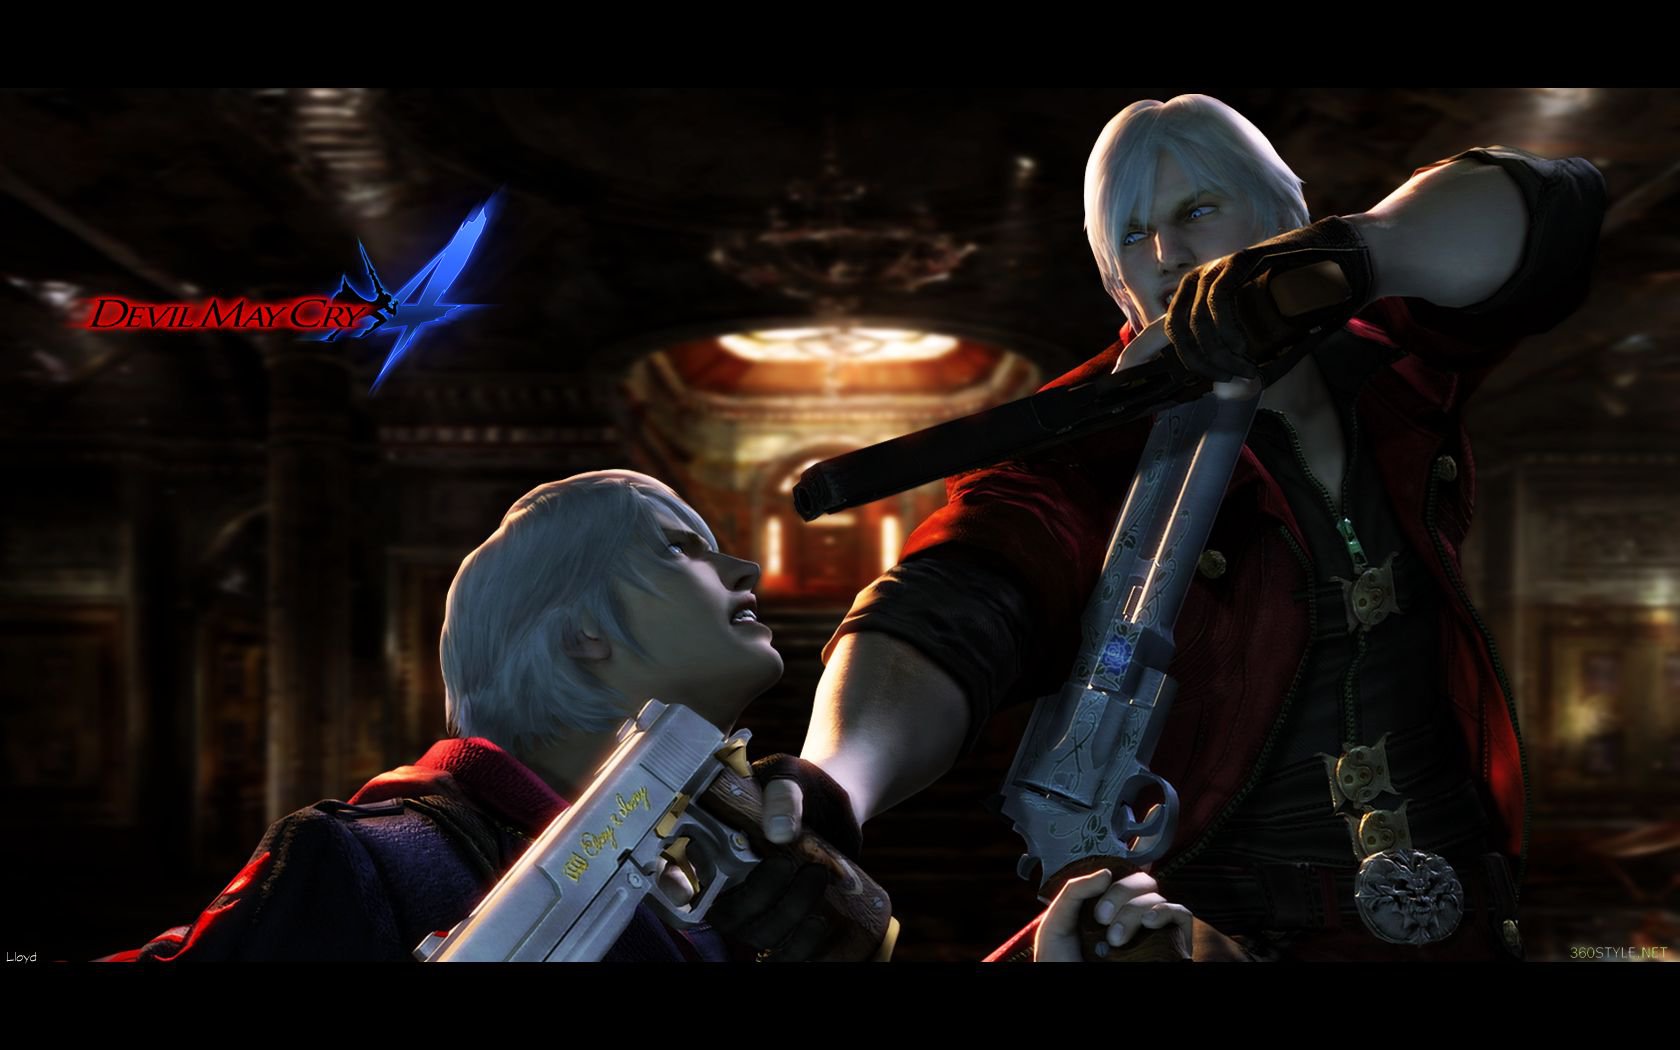 Devil May Cry 4 Wallpaper 2 by igotgame1075 on